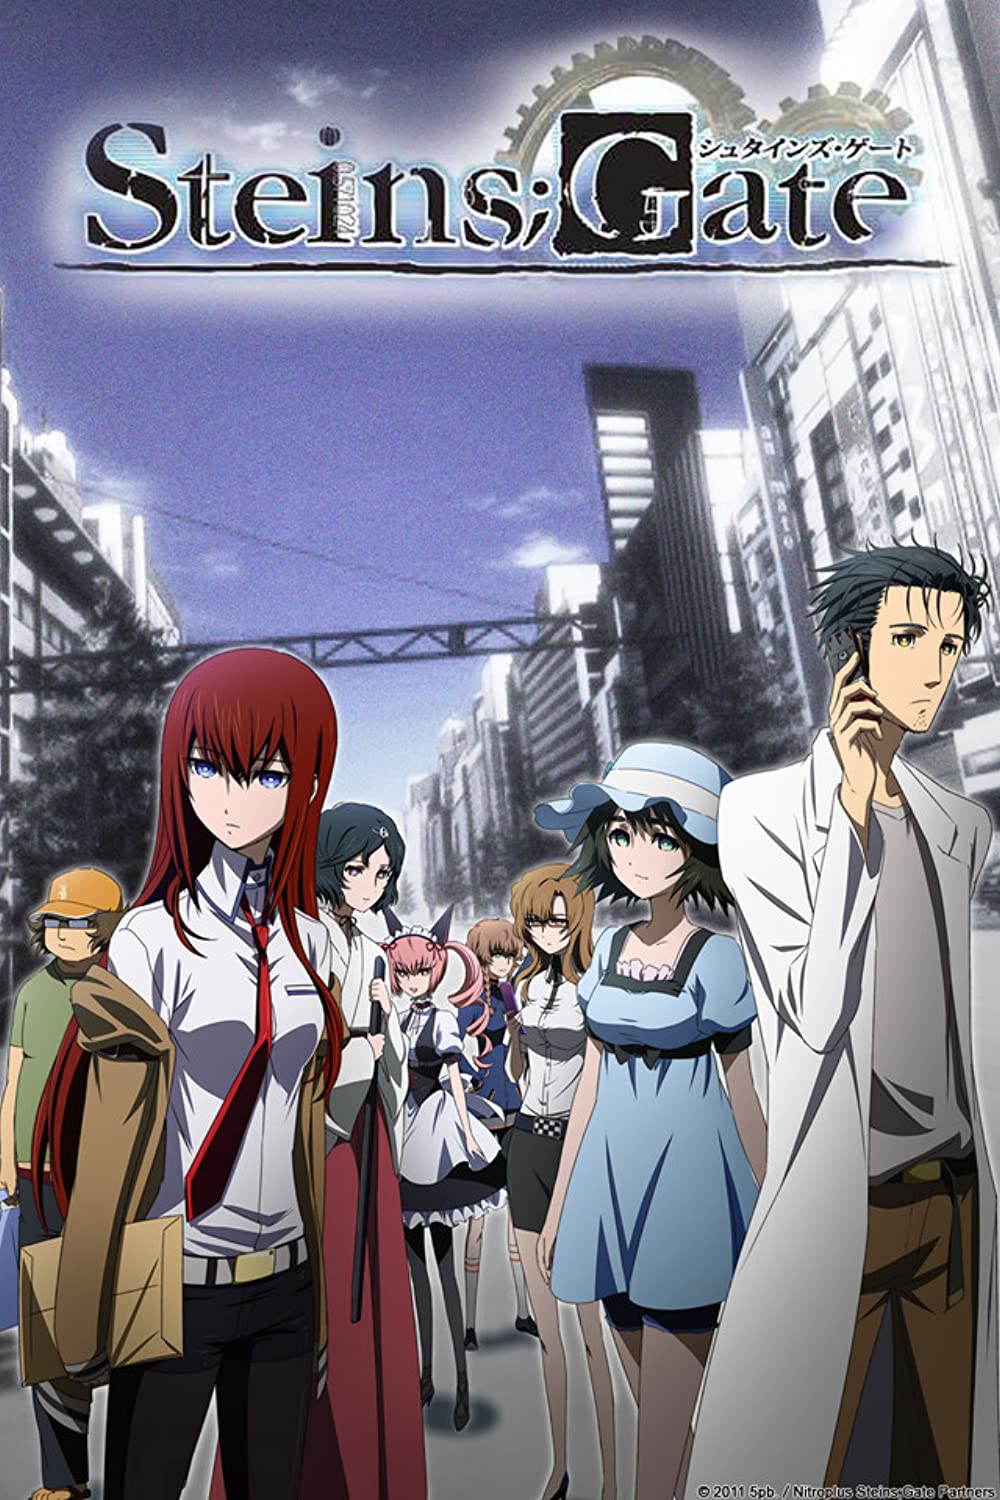 best anime of all time - Steins; Gate